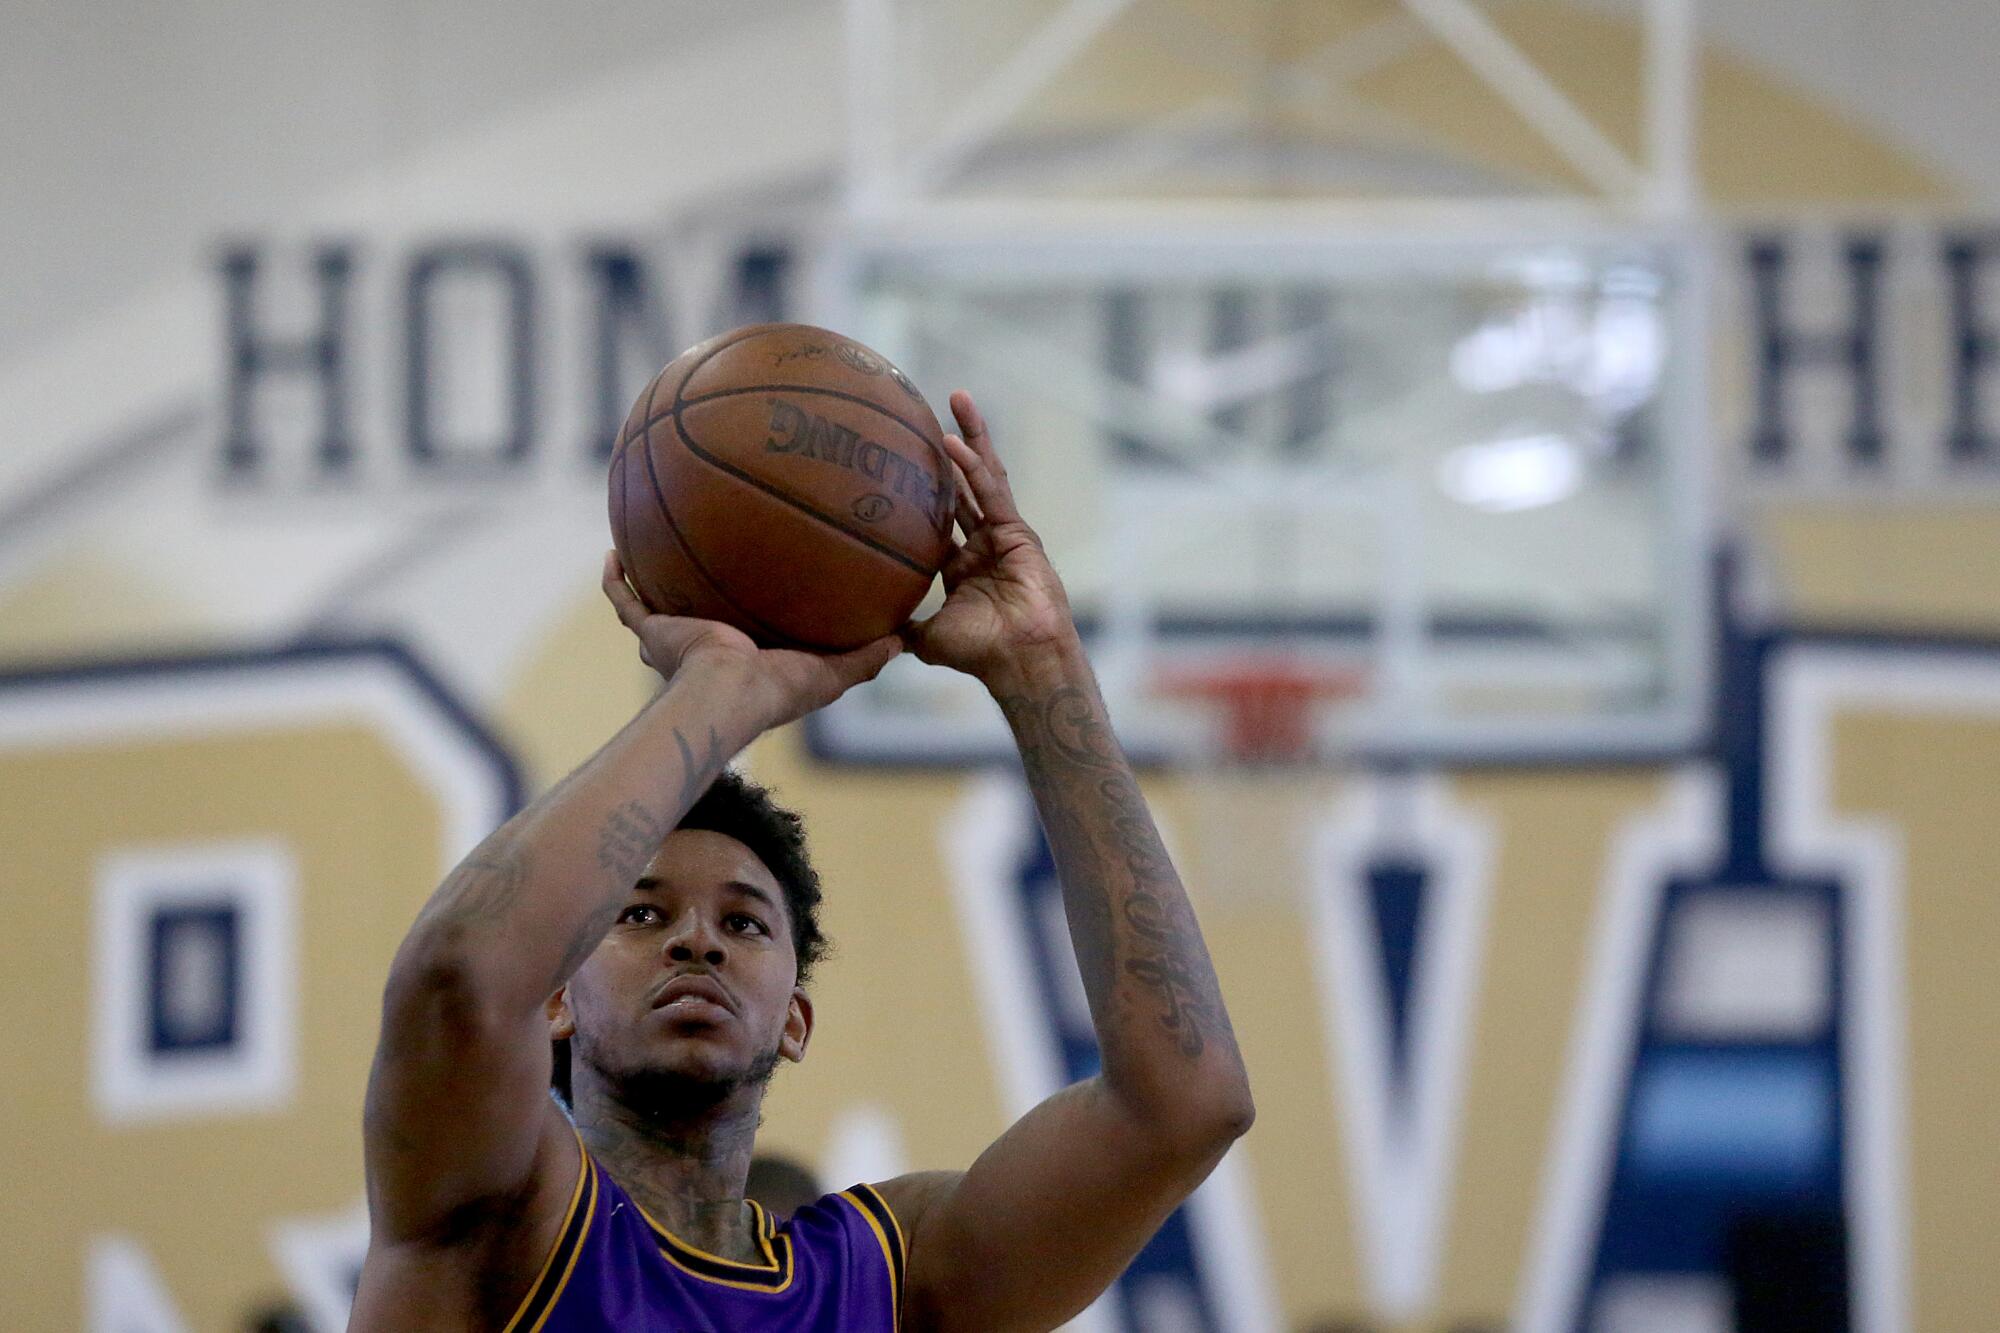 Former NBA player Nick Young shoots free throws for The Most Hated Players during a Drew League game June 26, 2021.